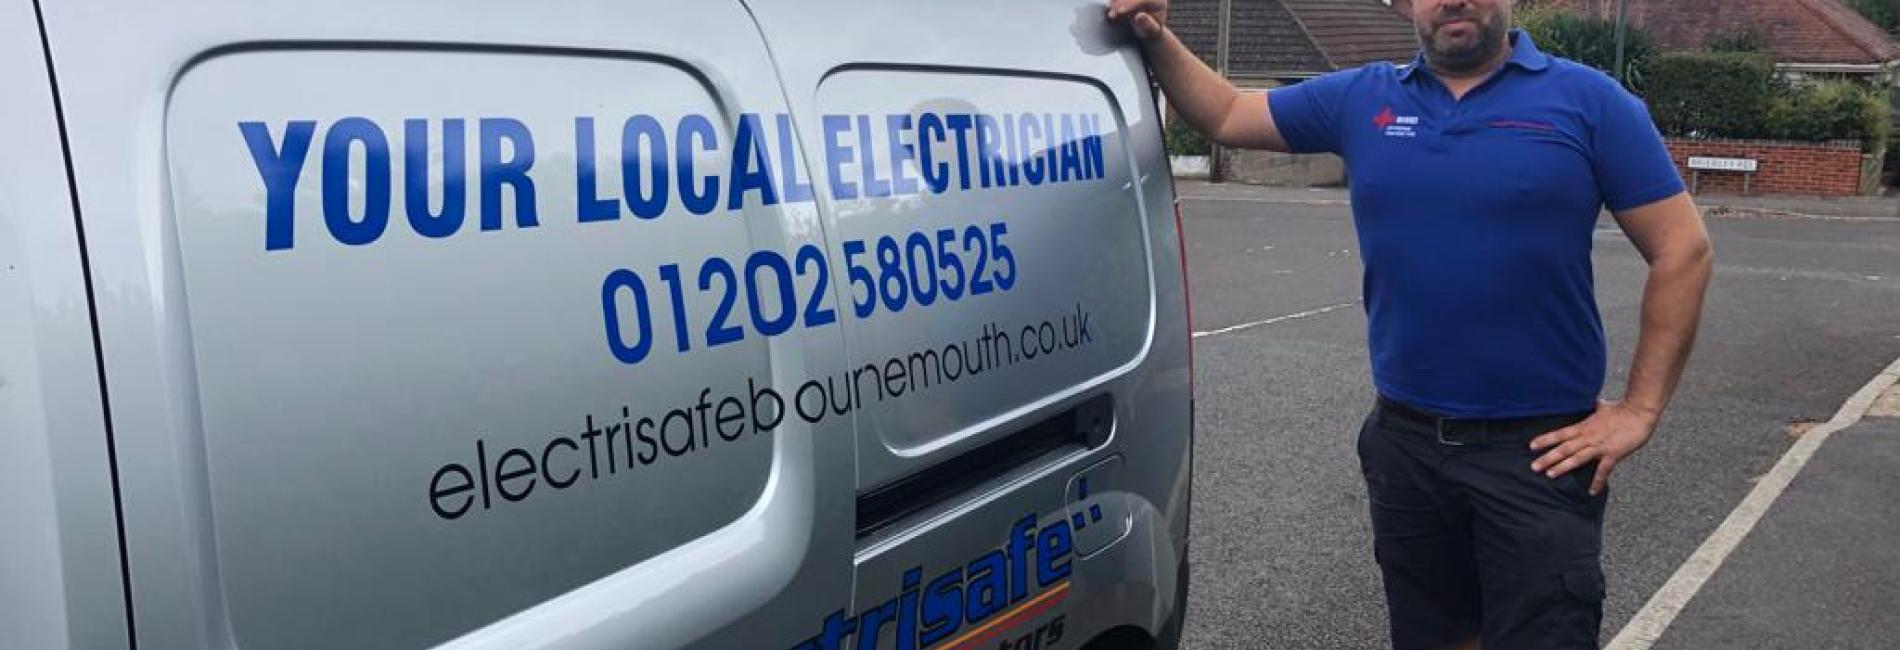 Electrician in Bournemouth